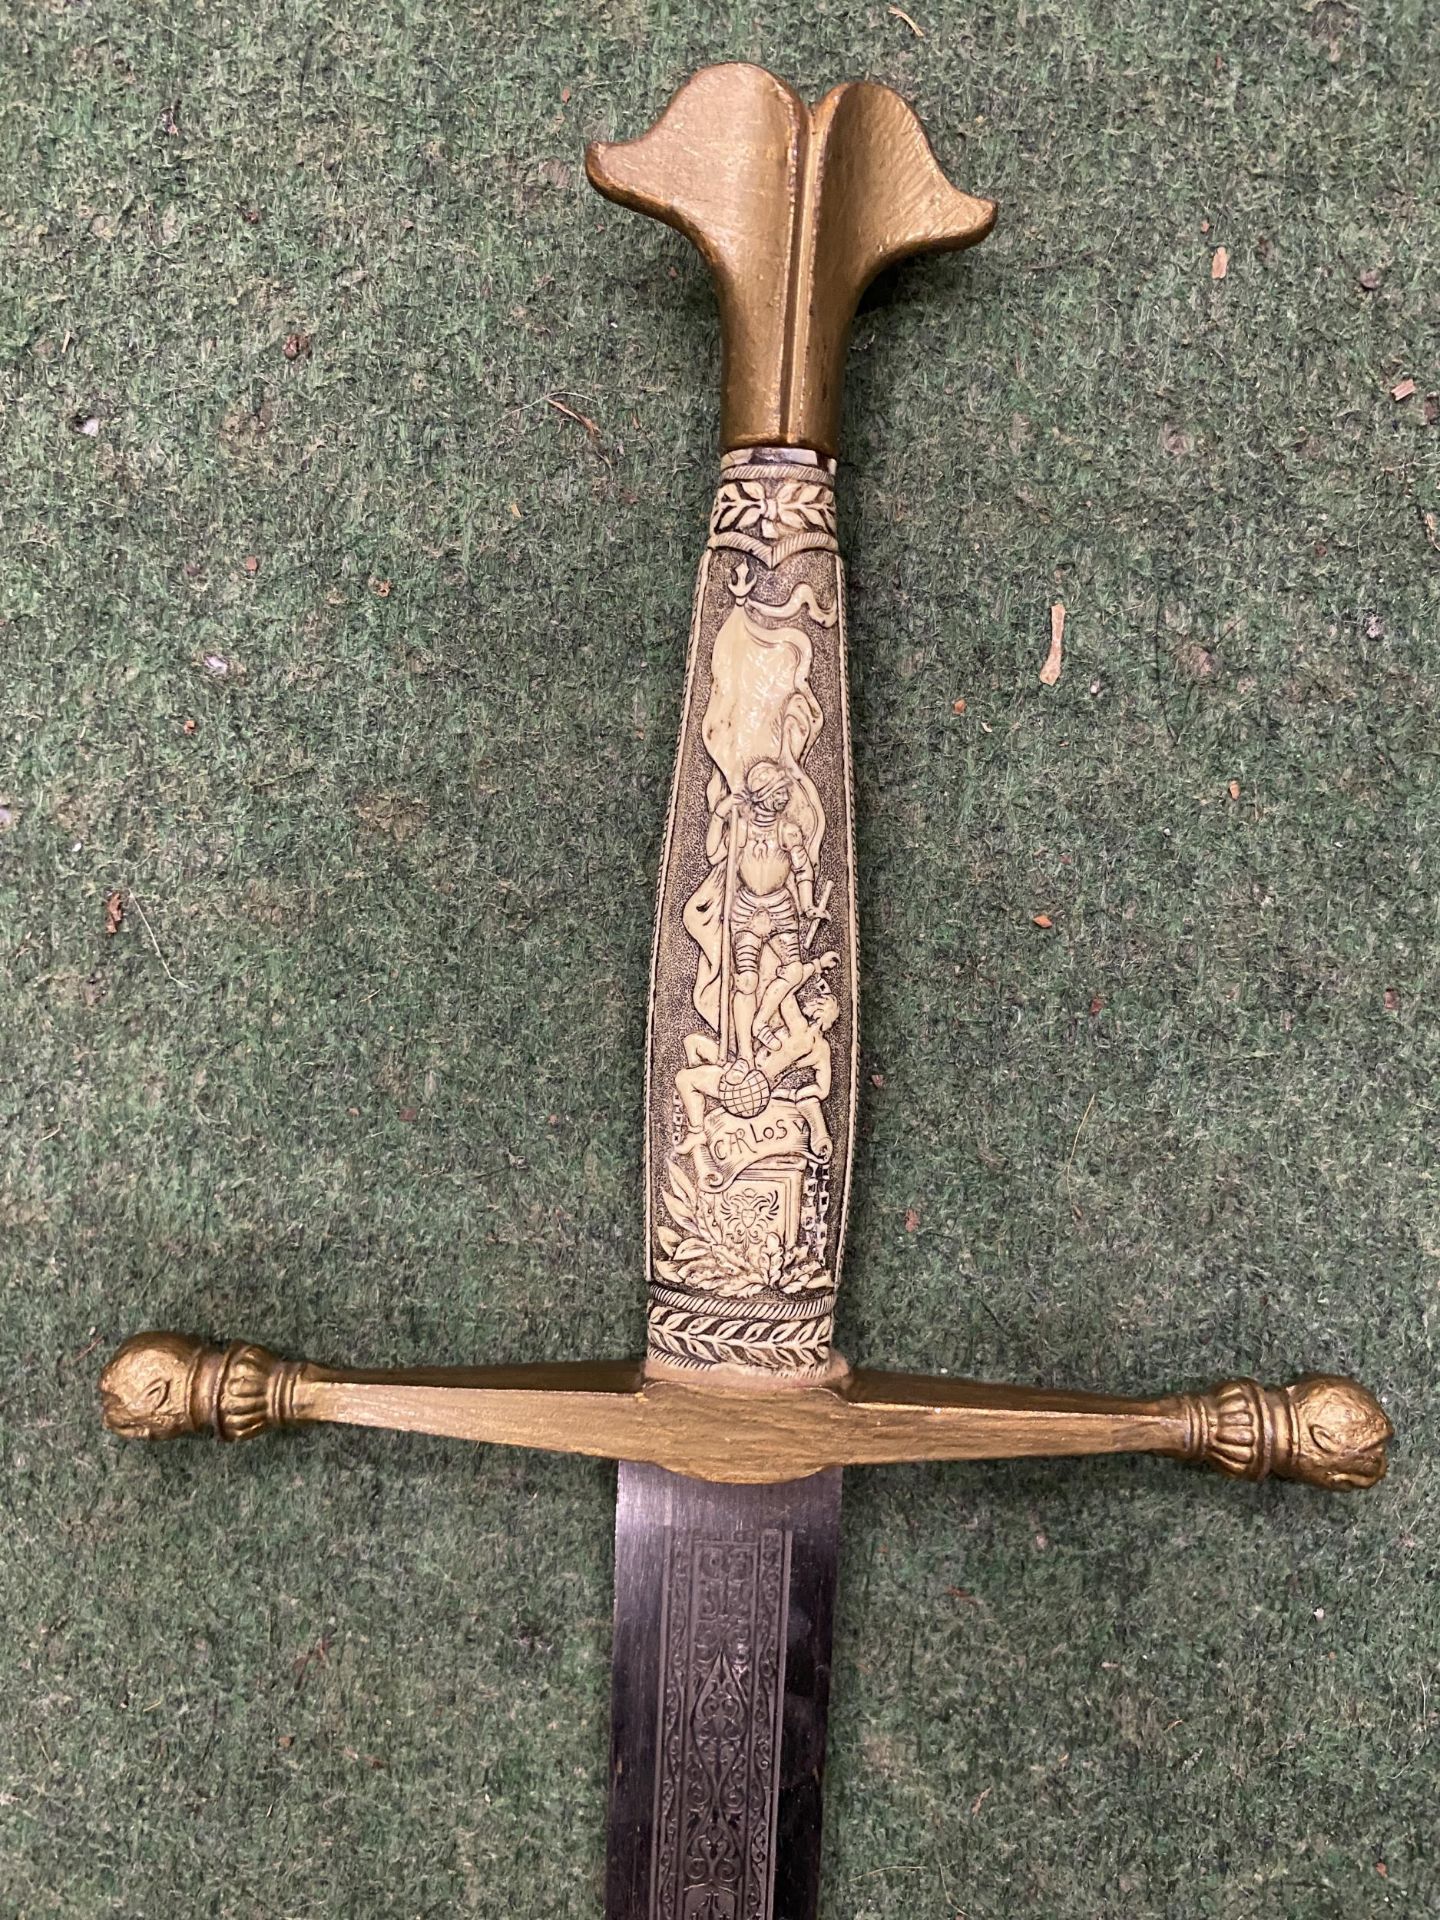 A VINTAGE BONE STYLE HANDLED SWORD WITH WOODEN SCABBARD - Image 2 of 2